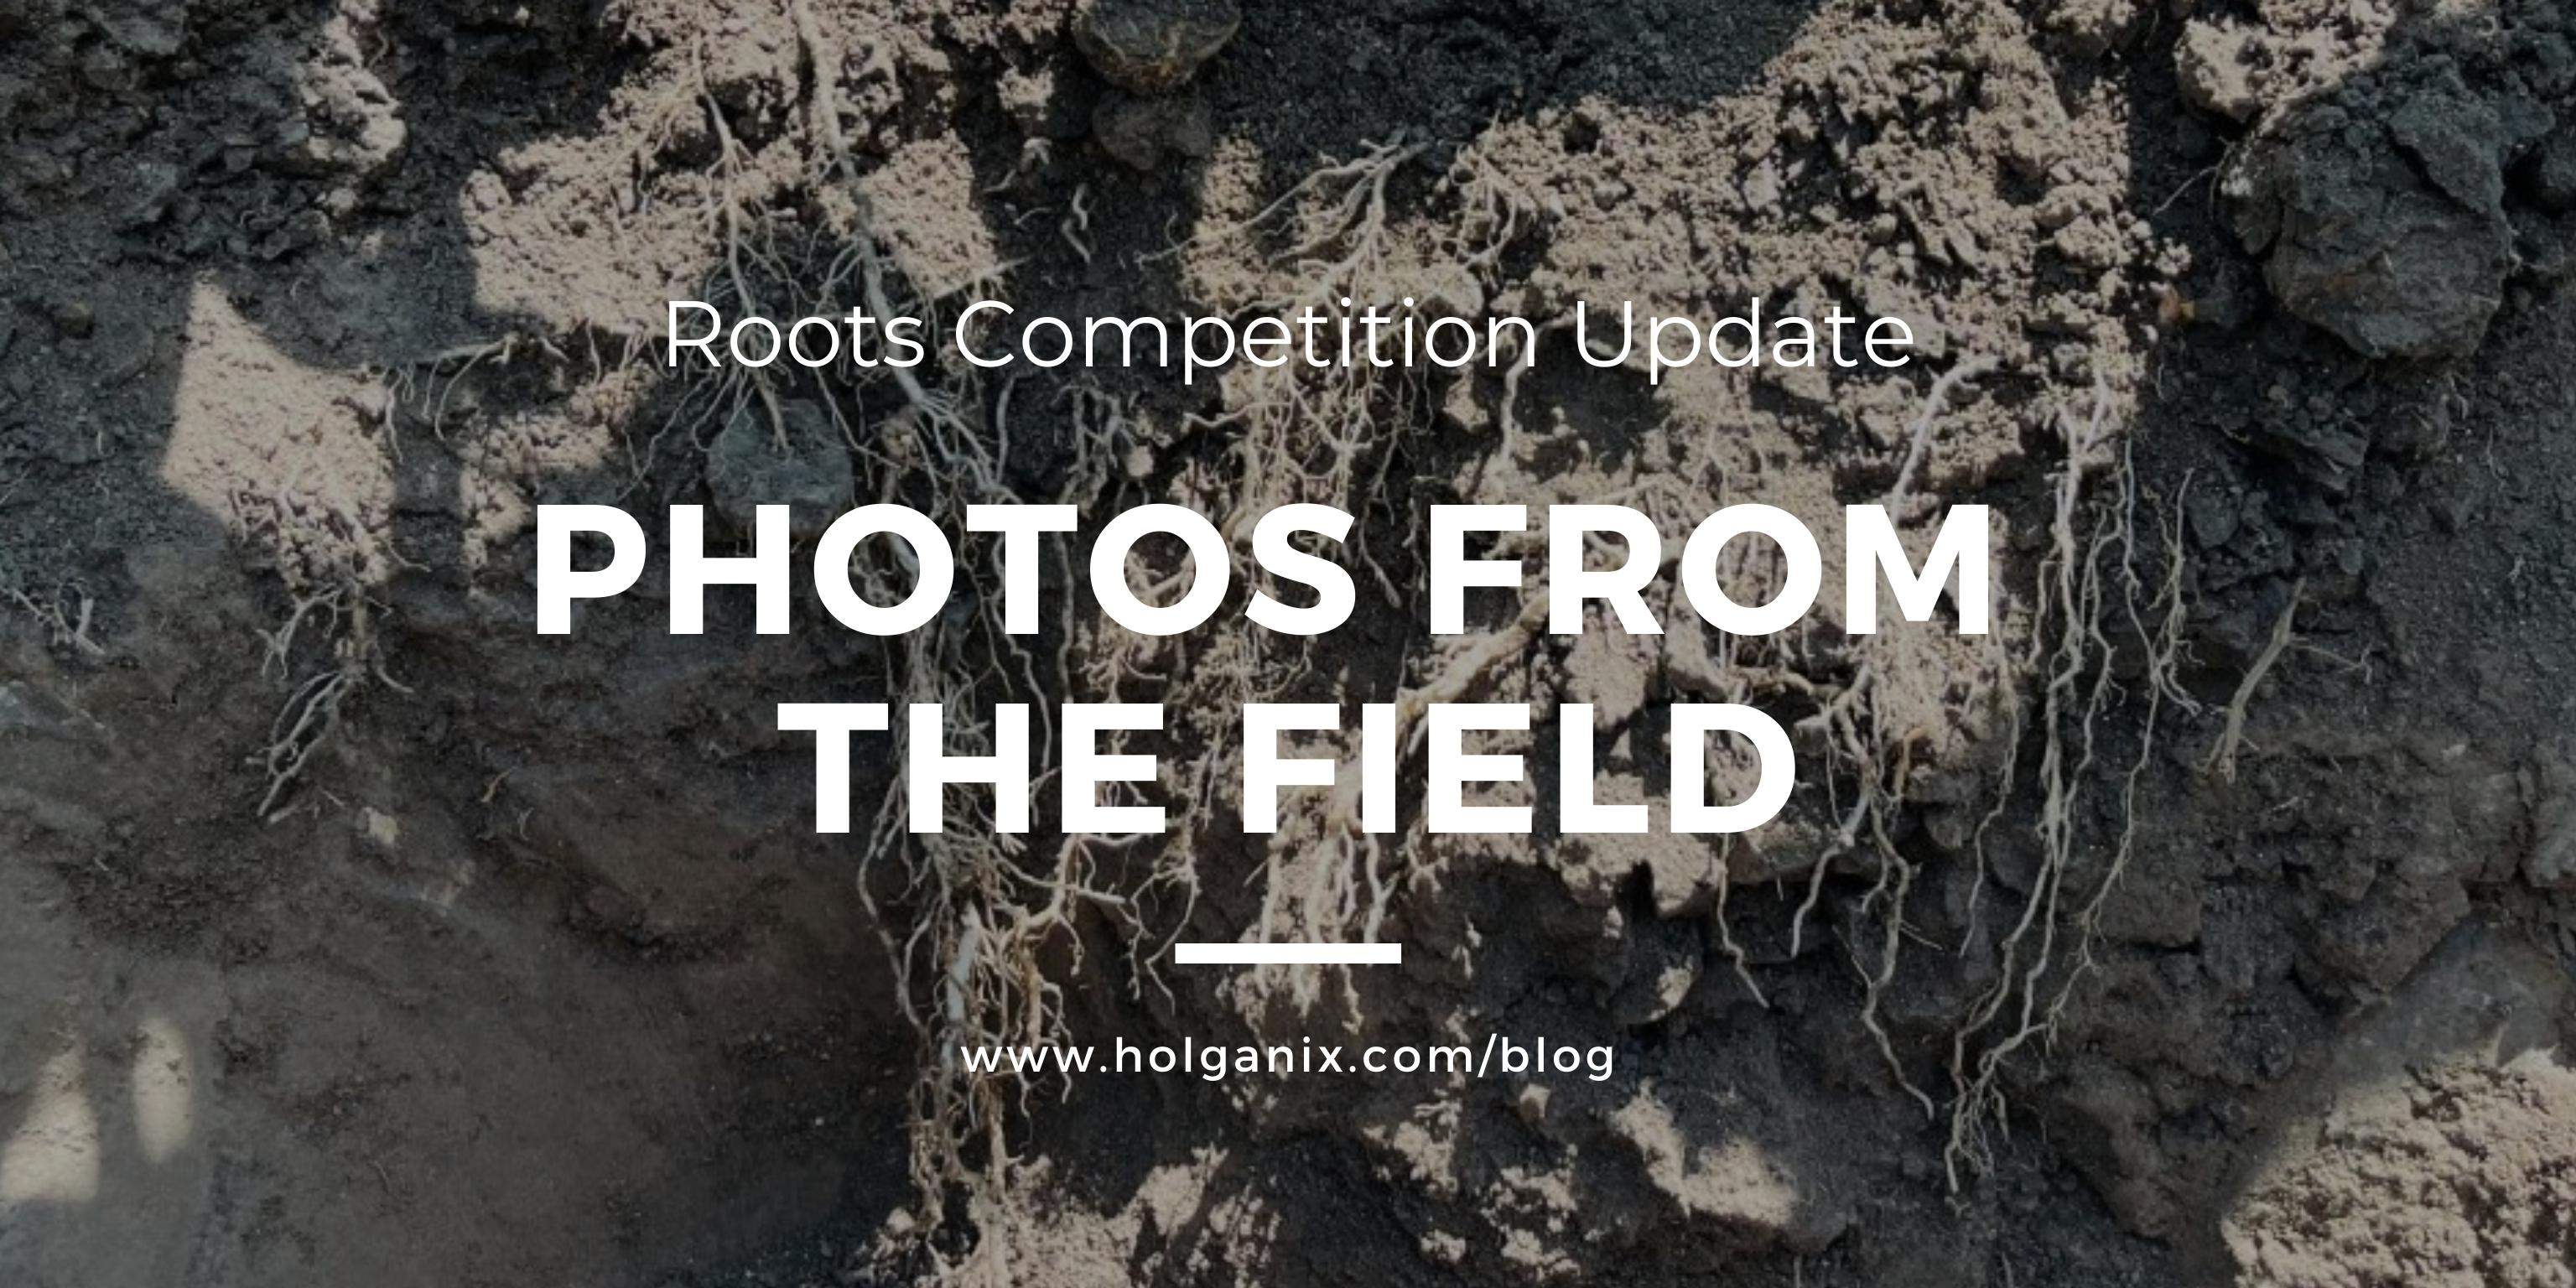 Roots Competition Update: Photos from the field